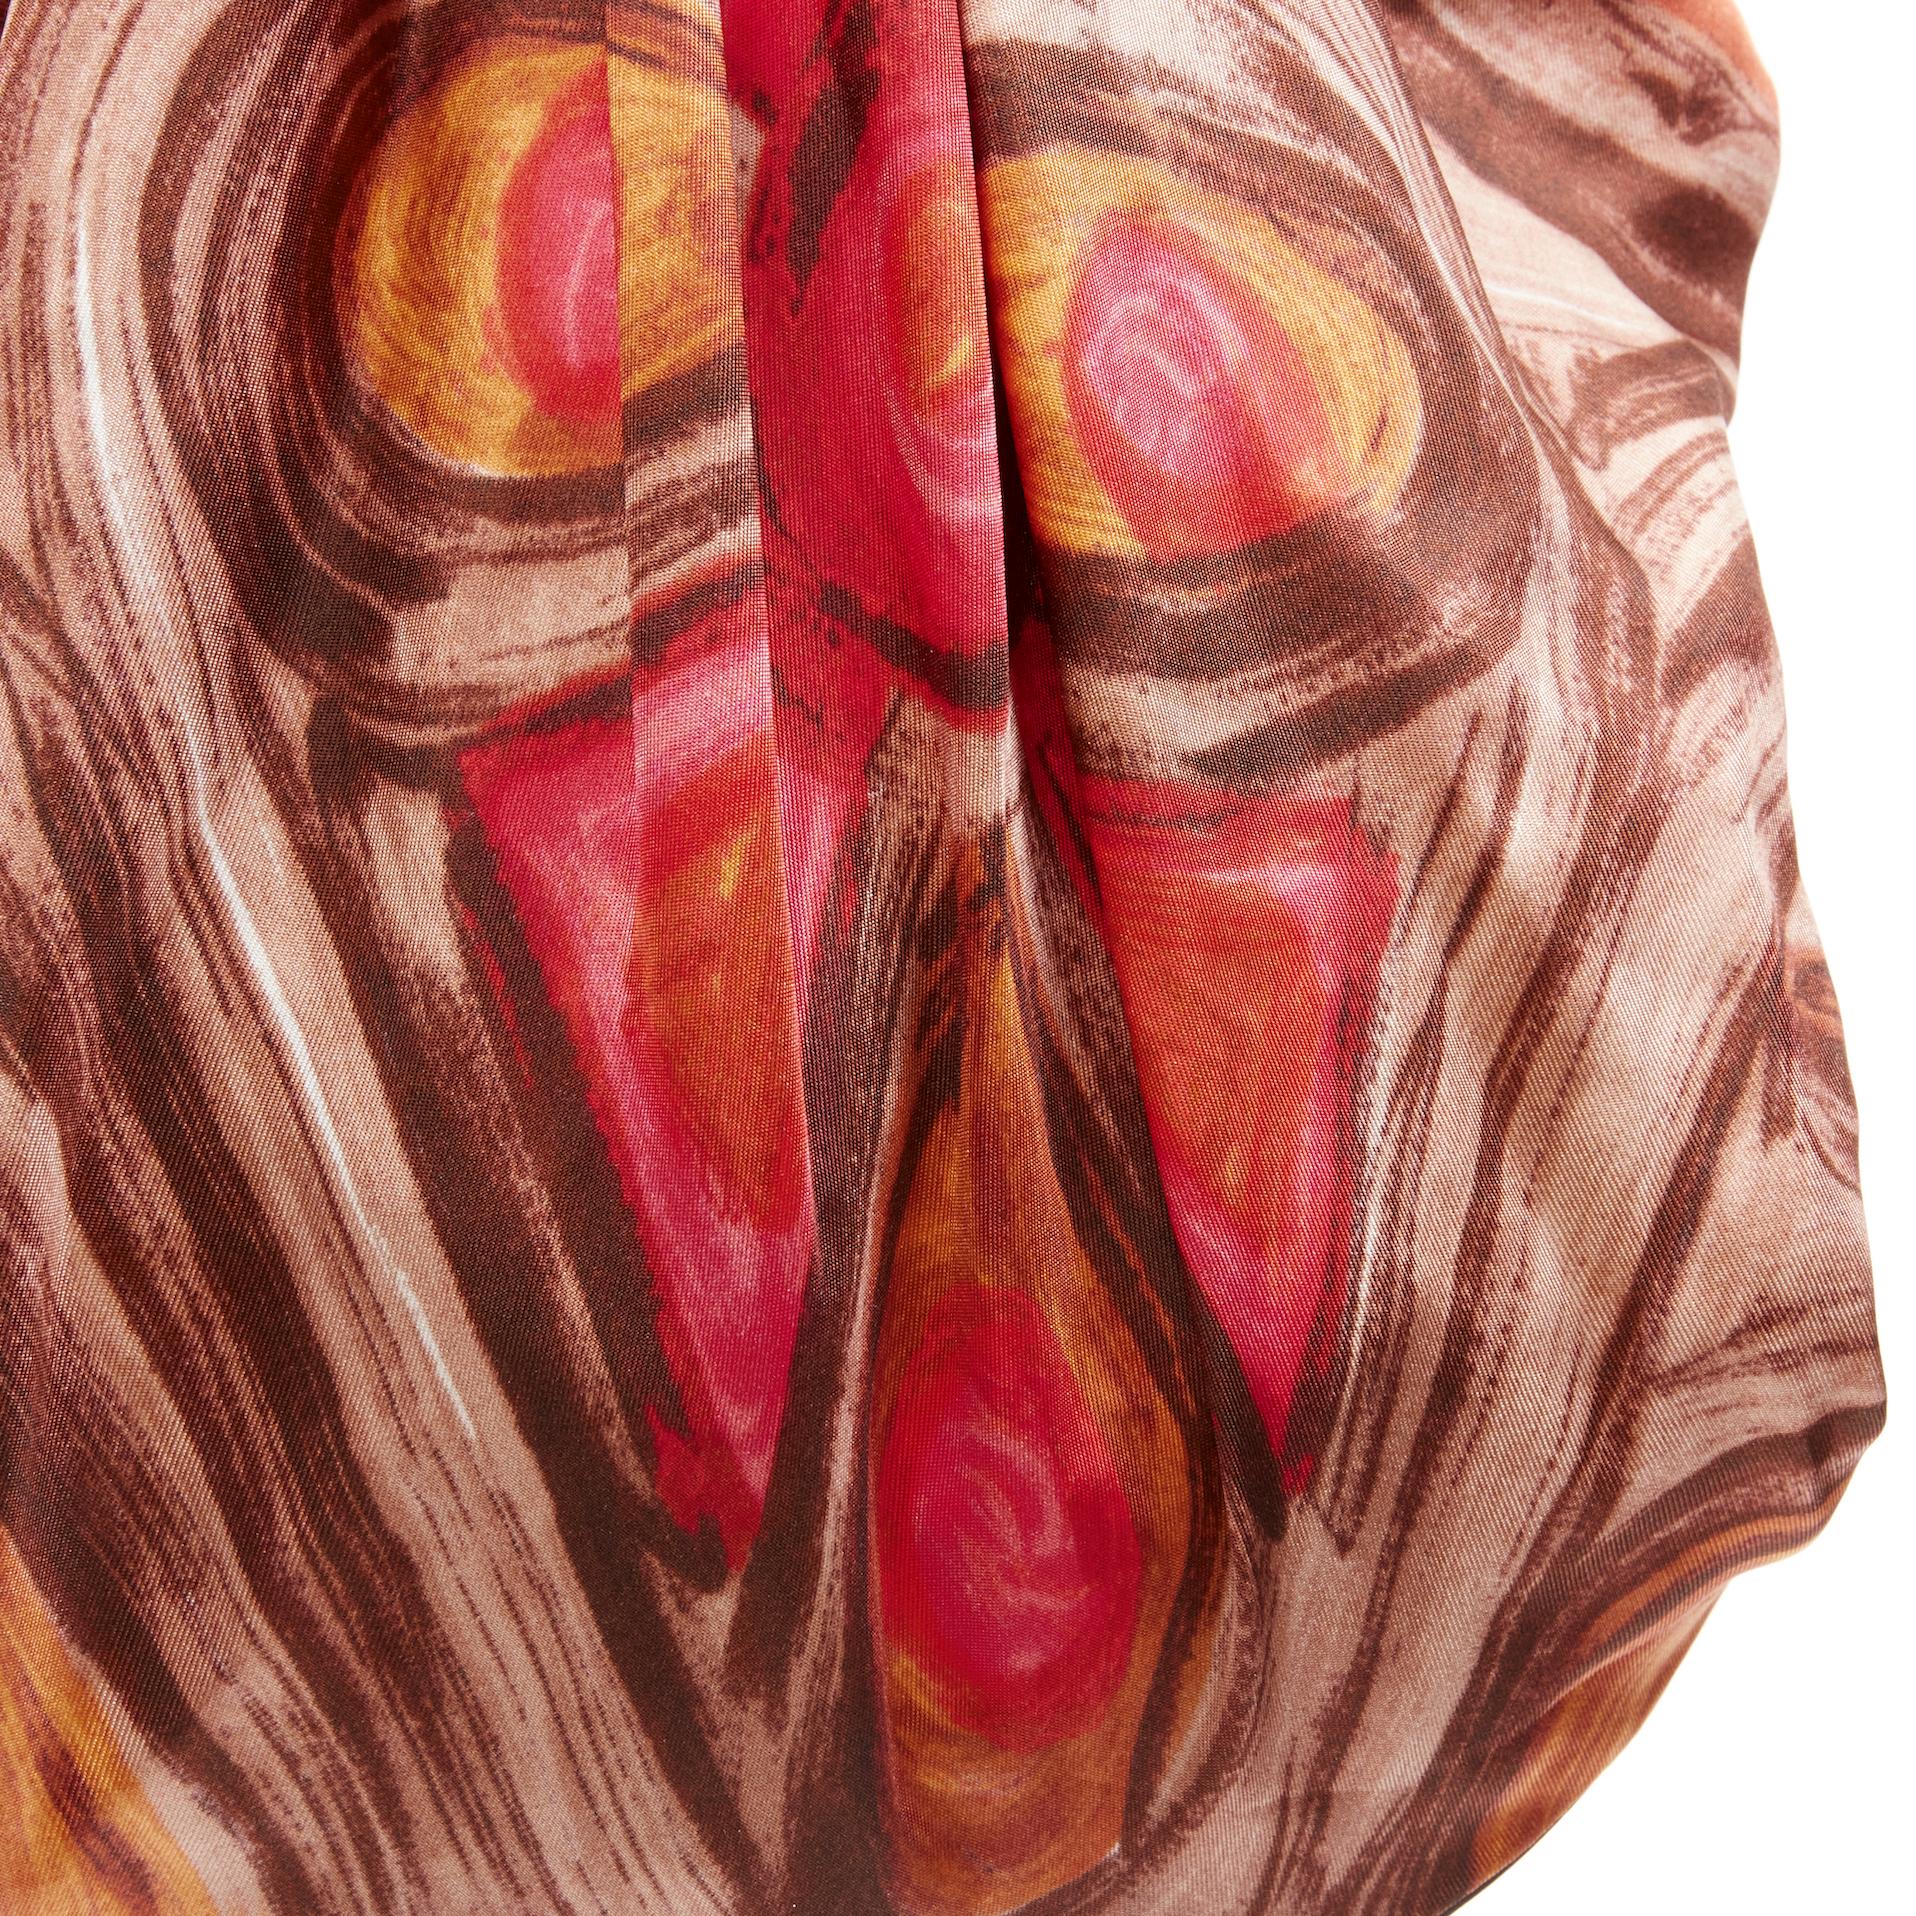 new OLD CELINE Phoebe Philo pink abstract print silk scarf brown leather bag 4